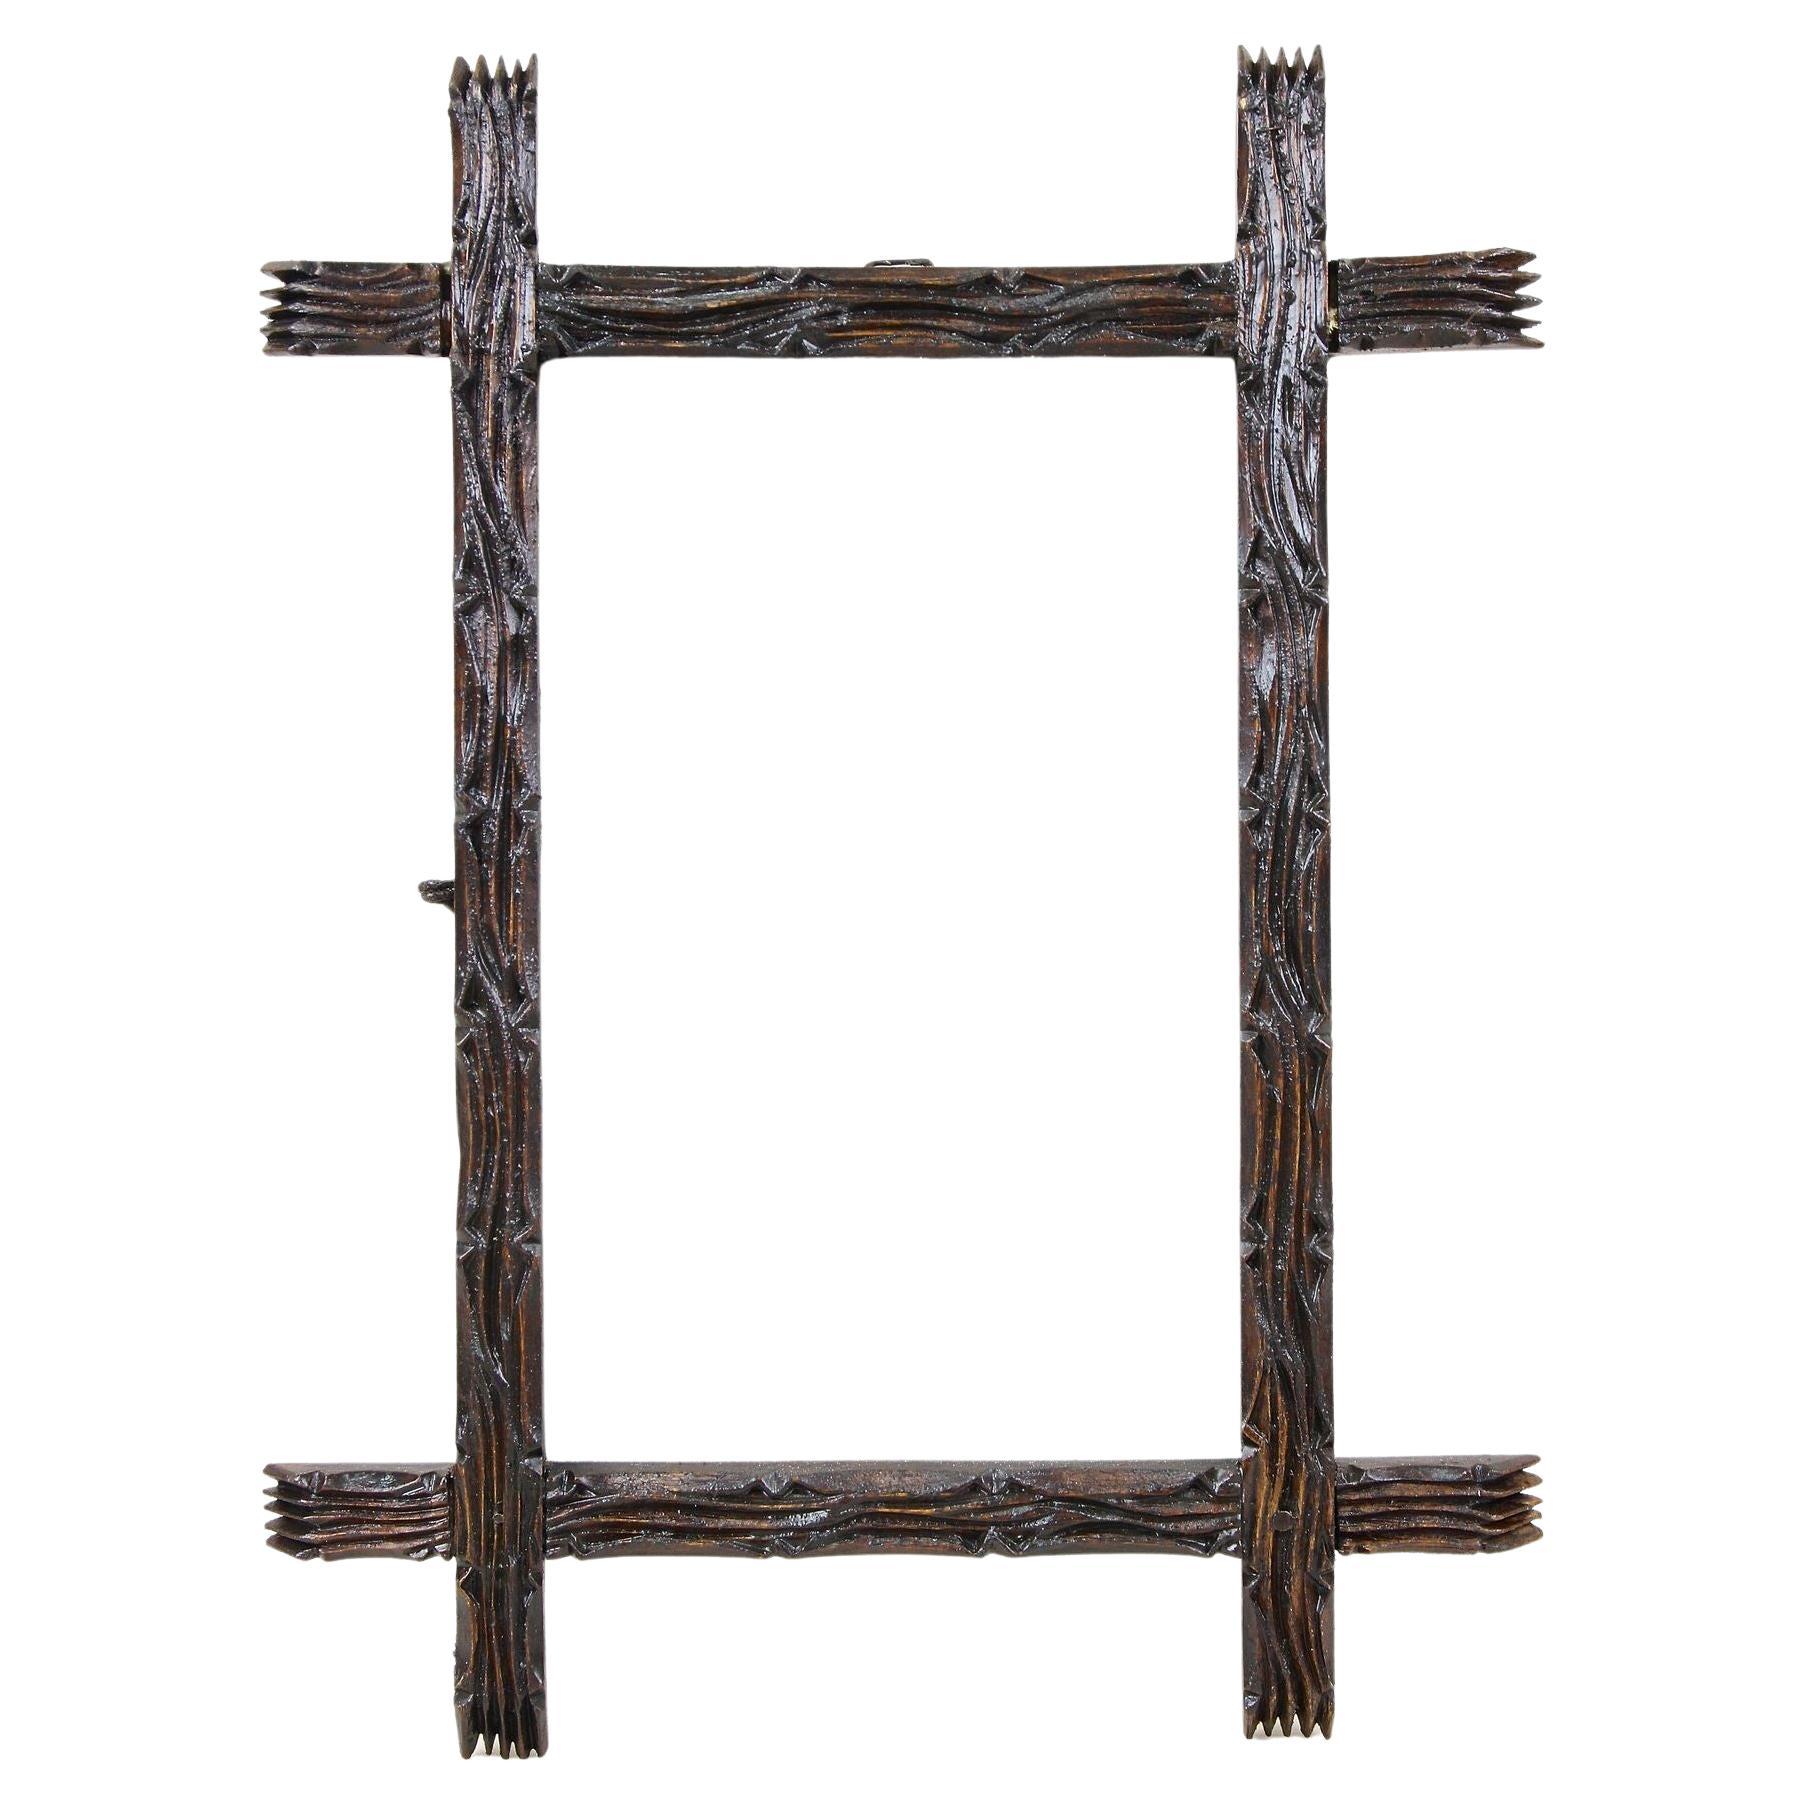 Rustic Wooden Photo Frame, Black Forest Style - Handcarved, Austria circa 1860